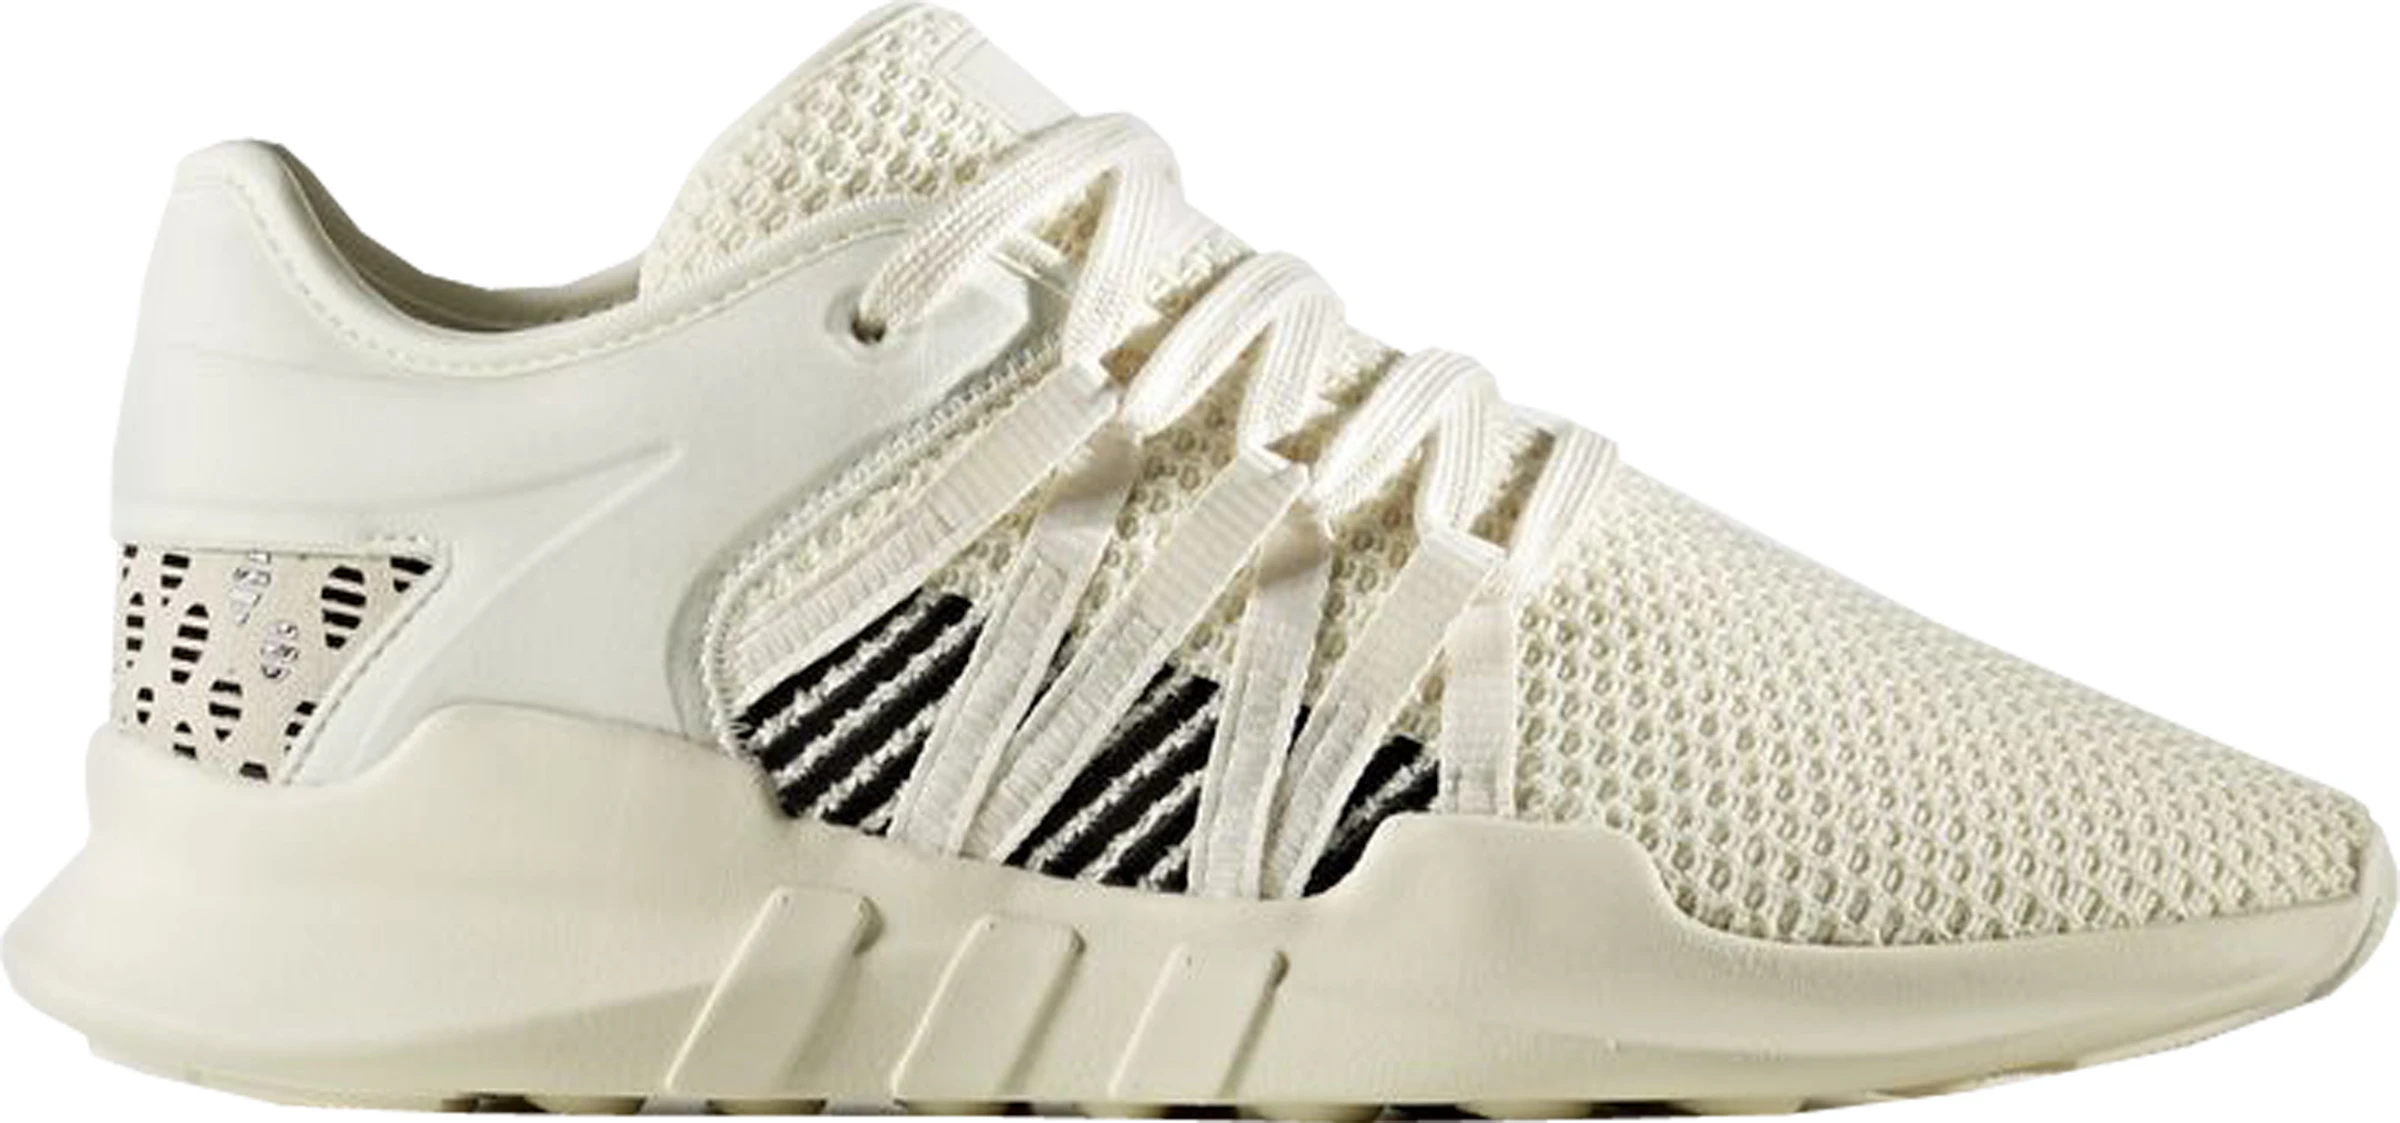 EQT Racing Adv Off White (W) - BY9799 -